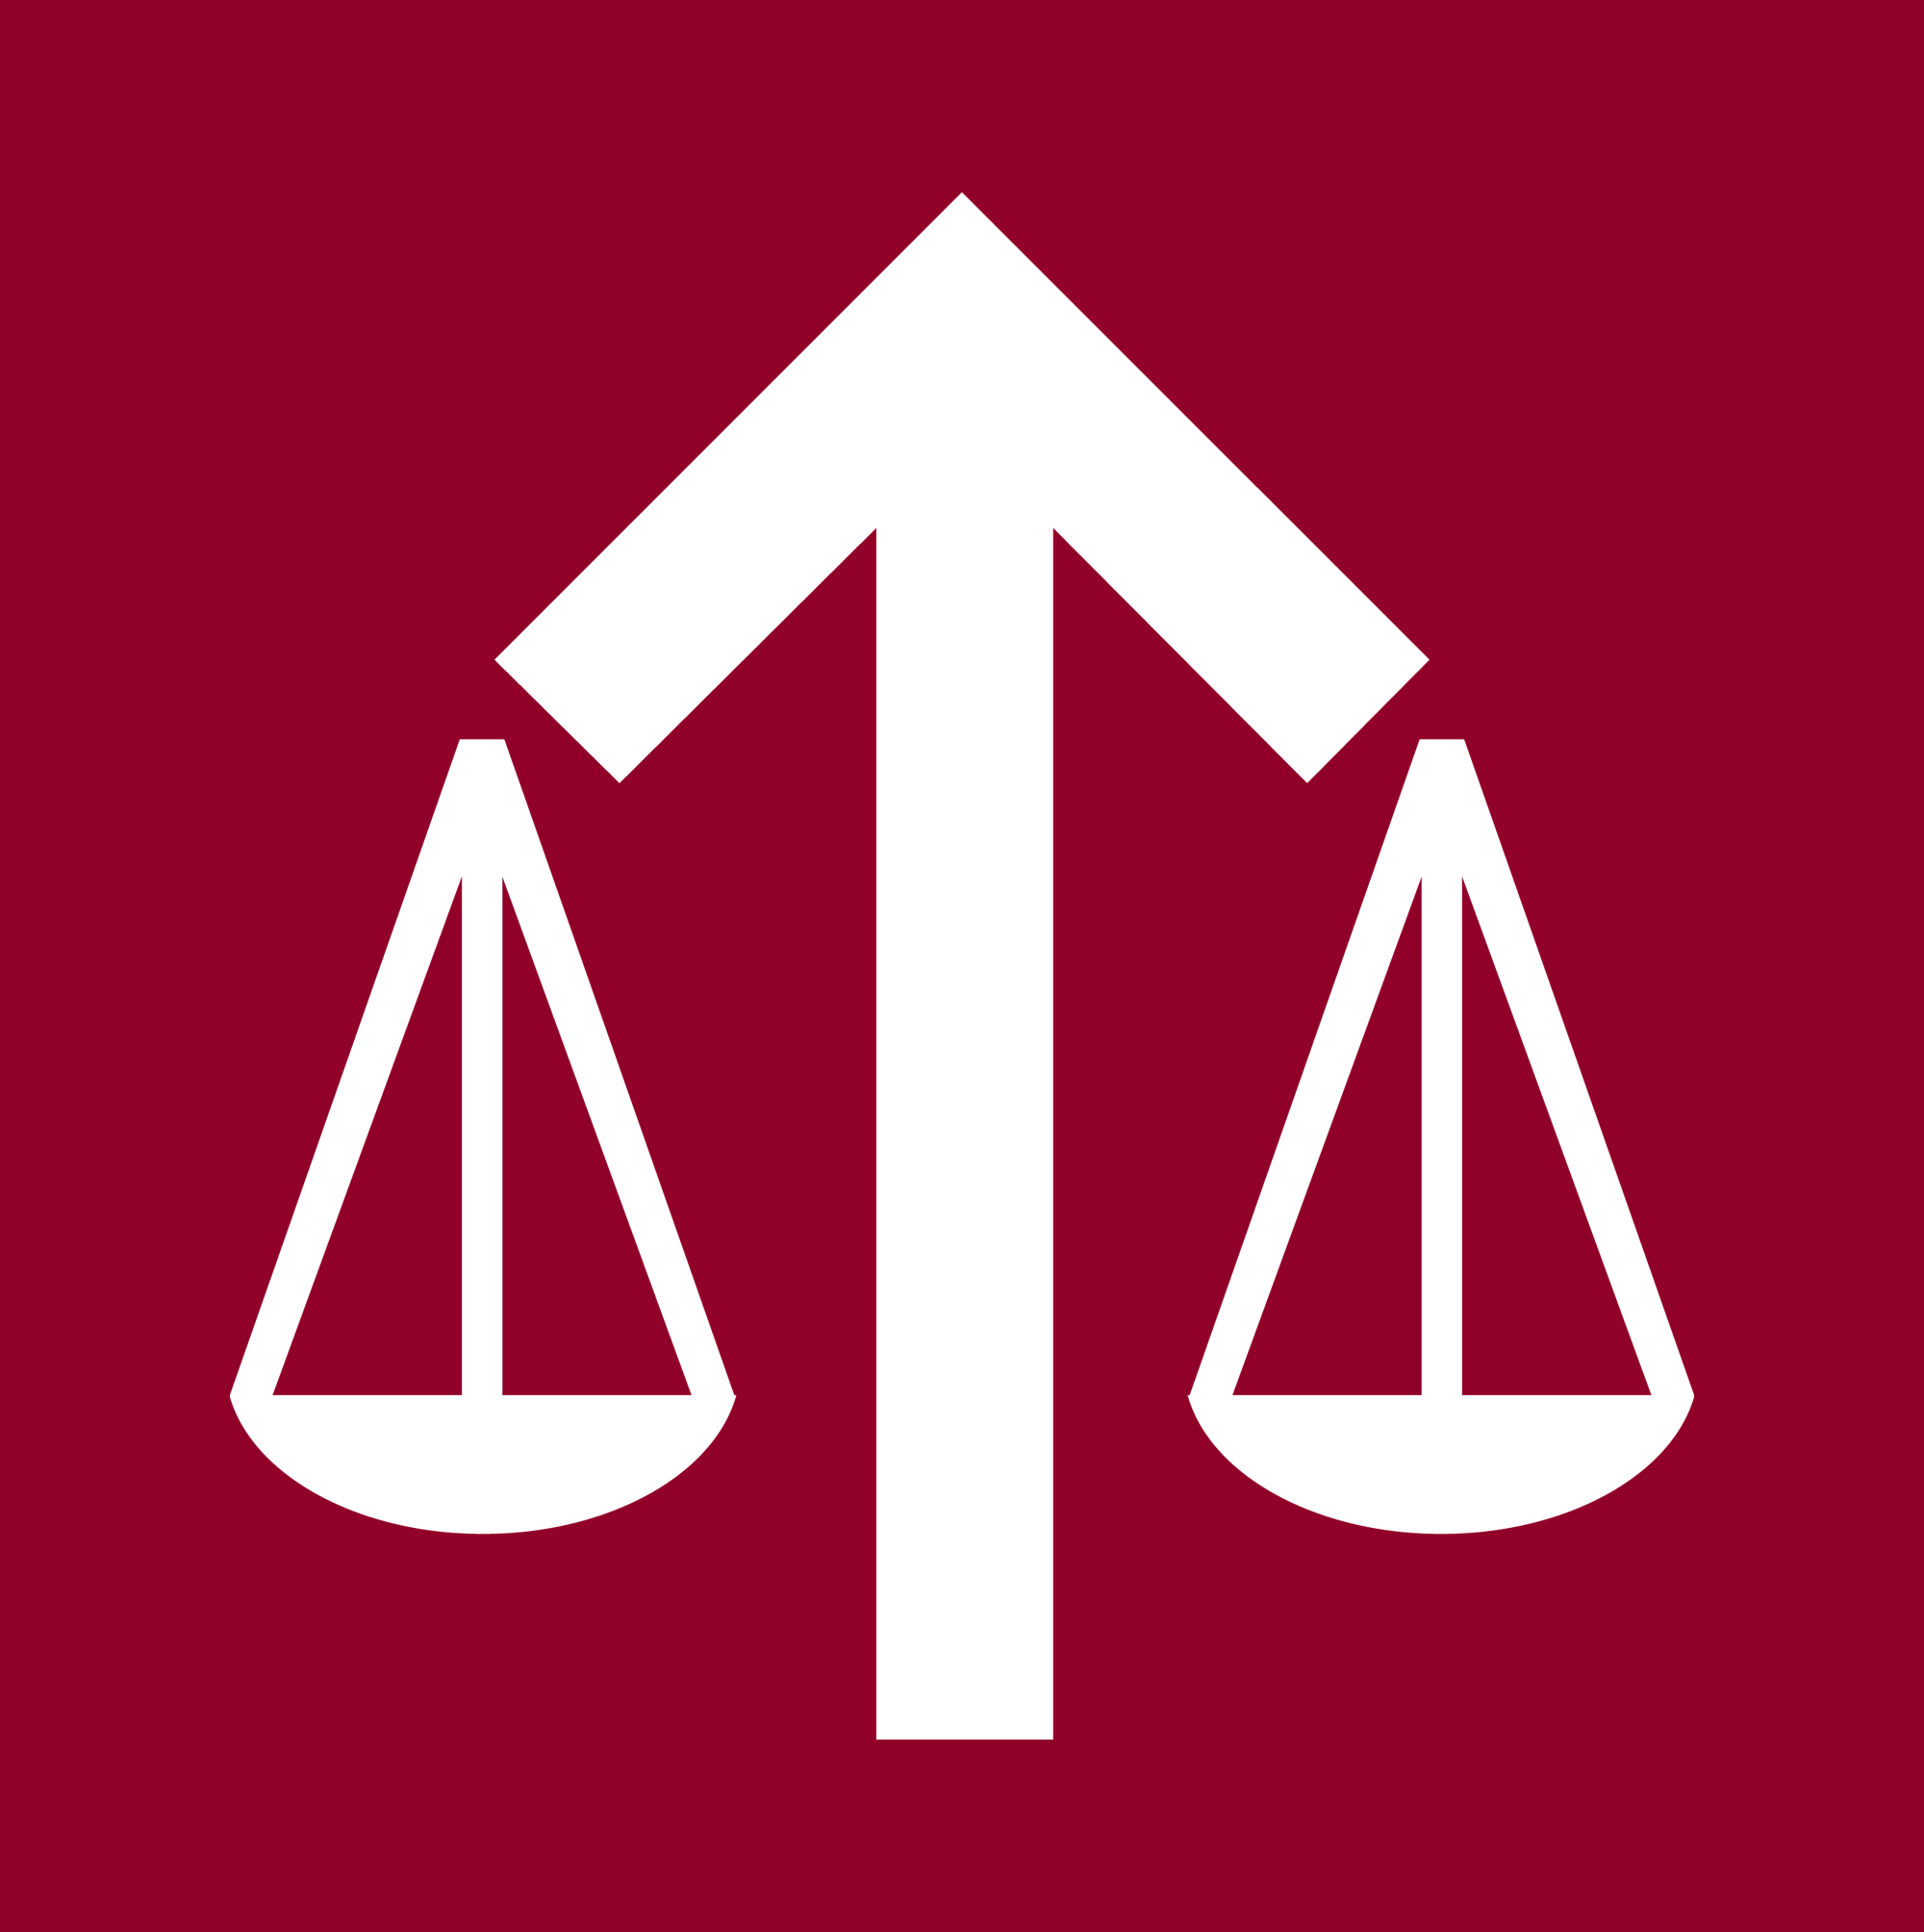 In Our Corner justice scale logo